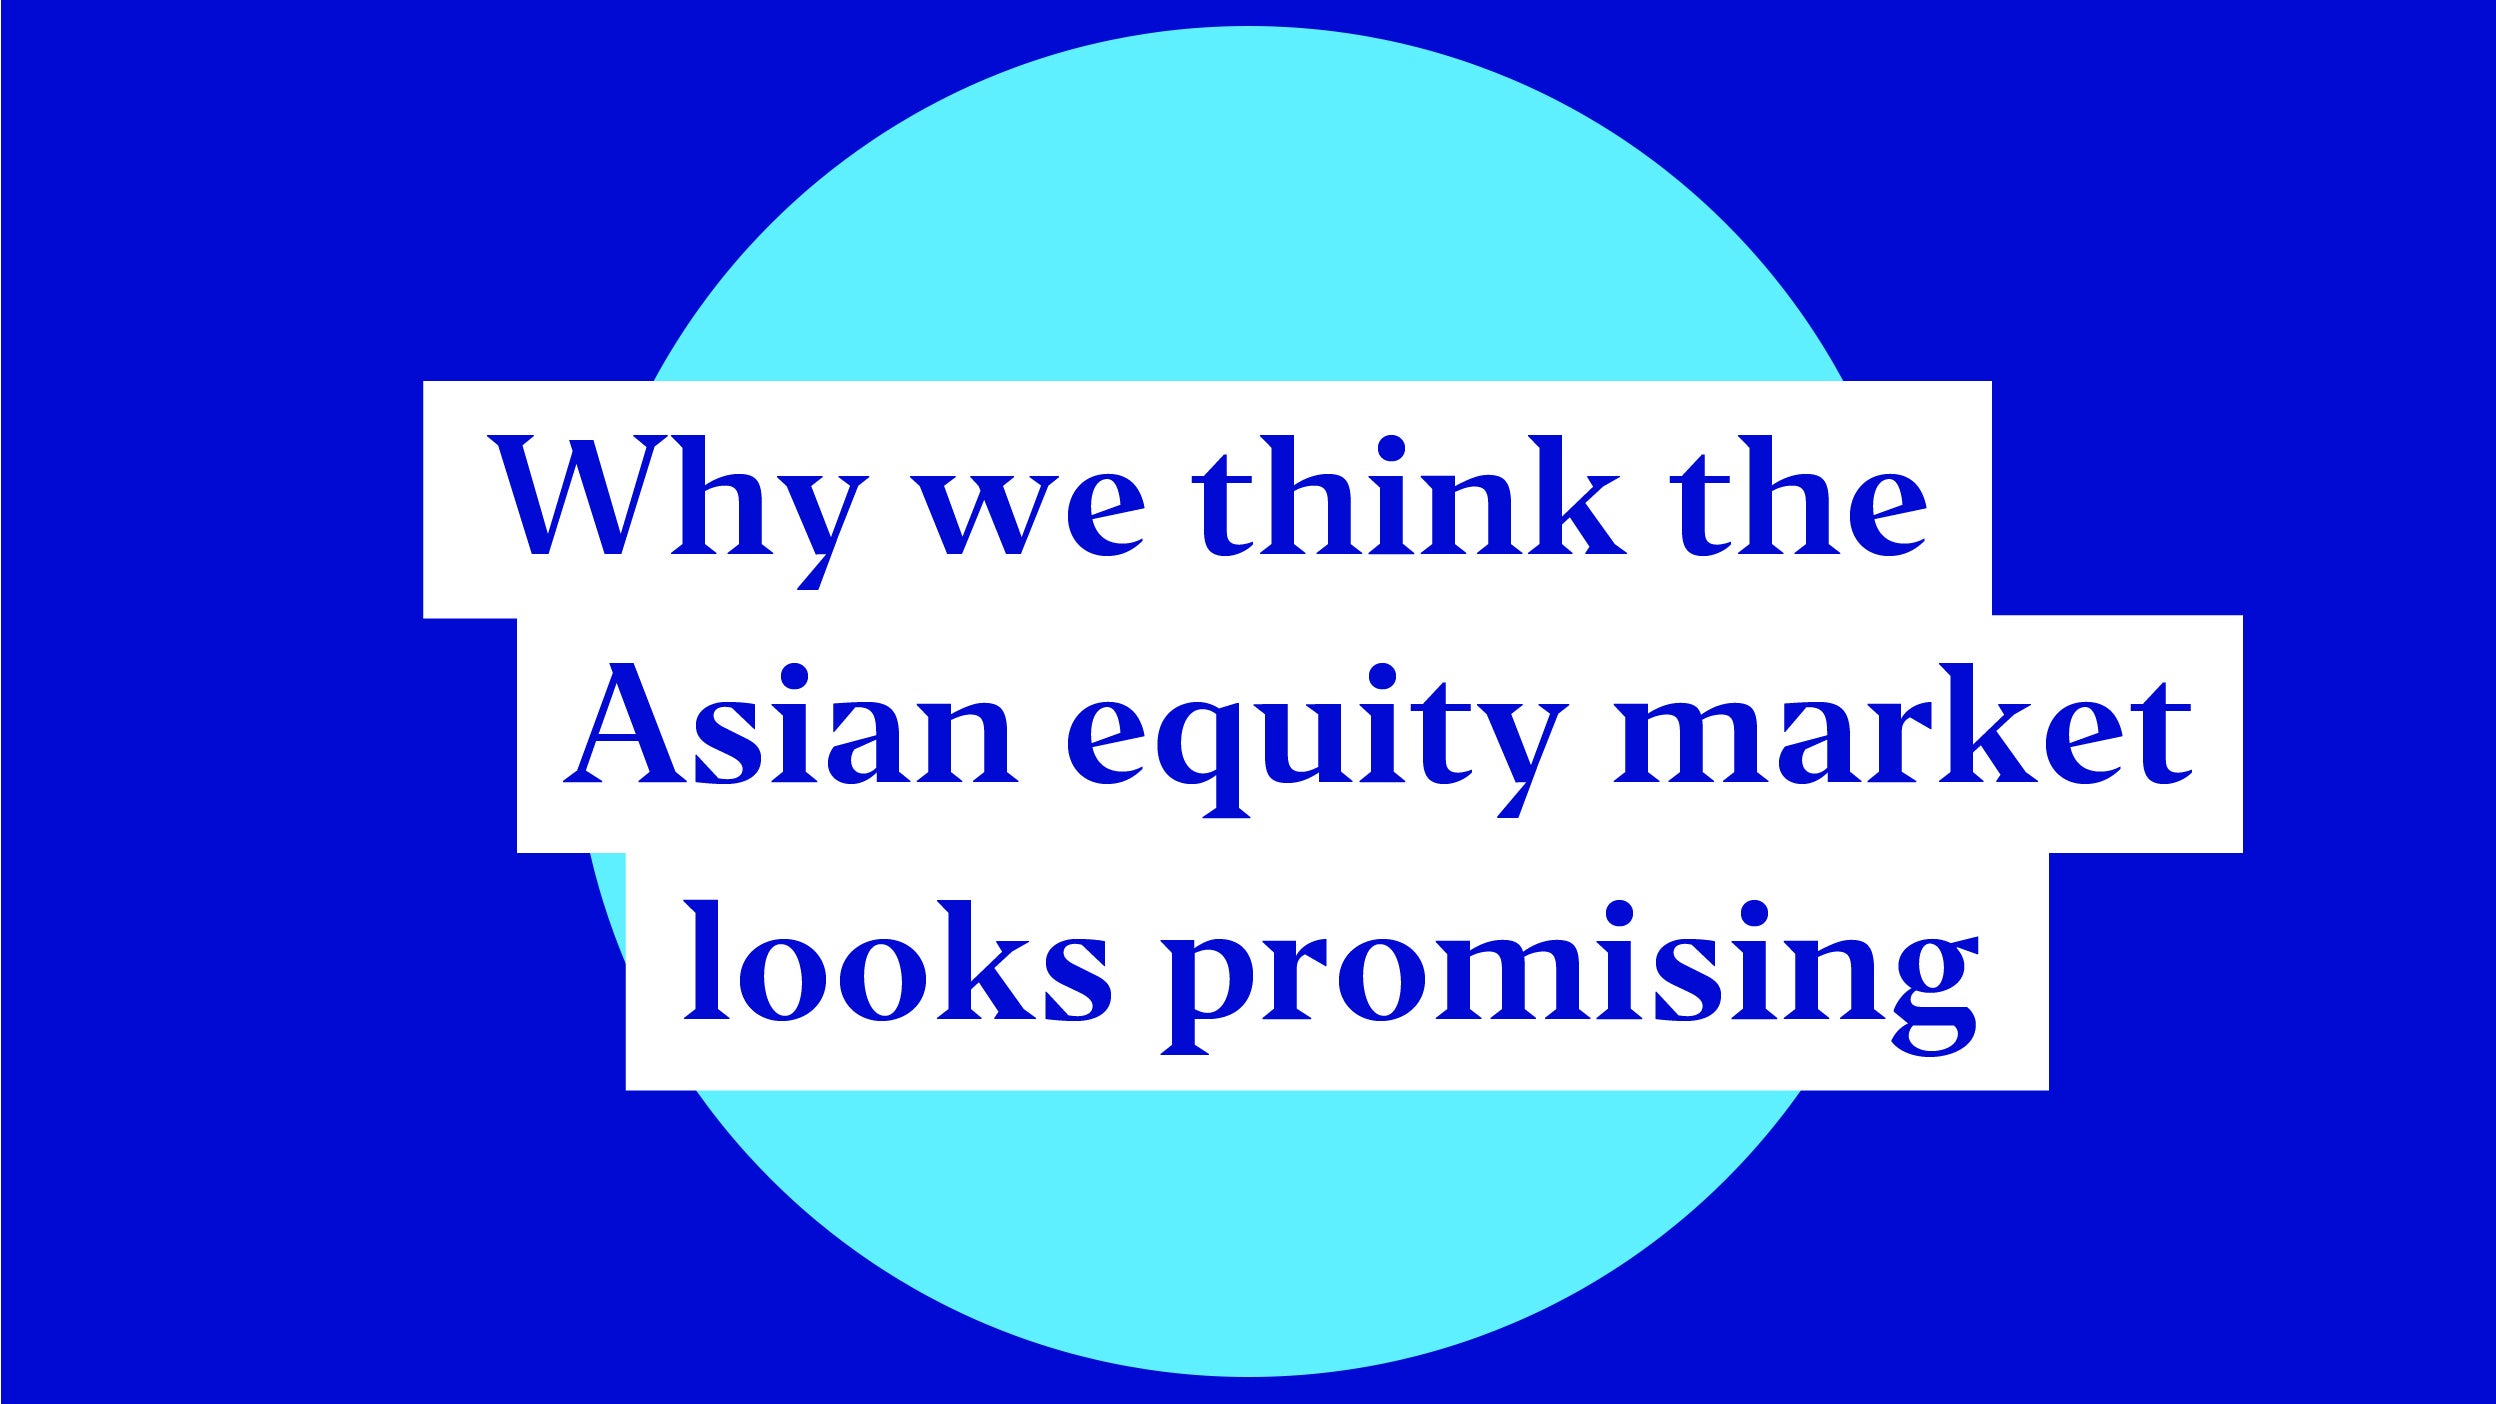 The Asian equity market looks promising